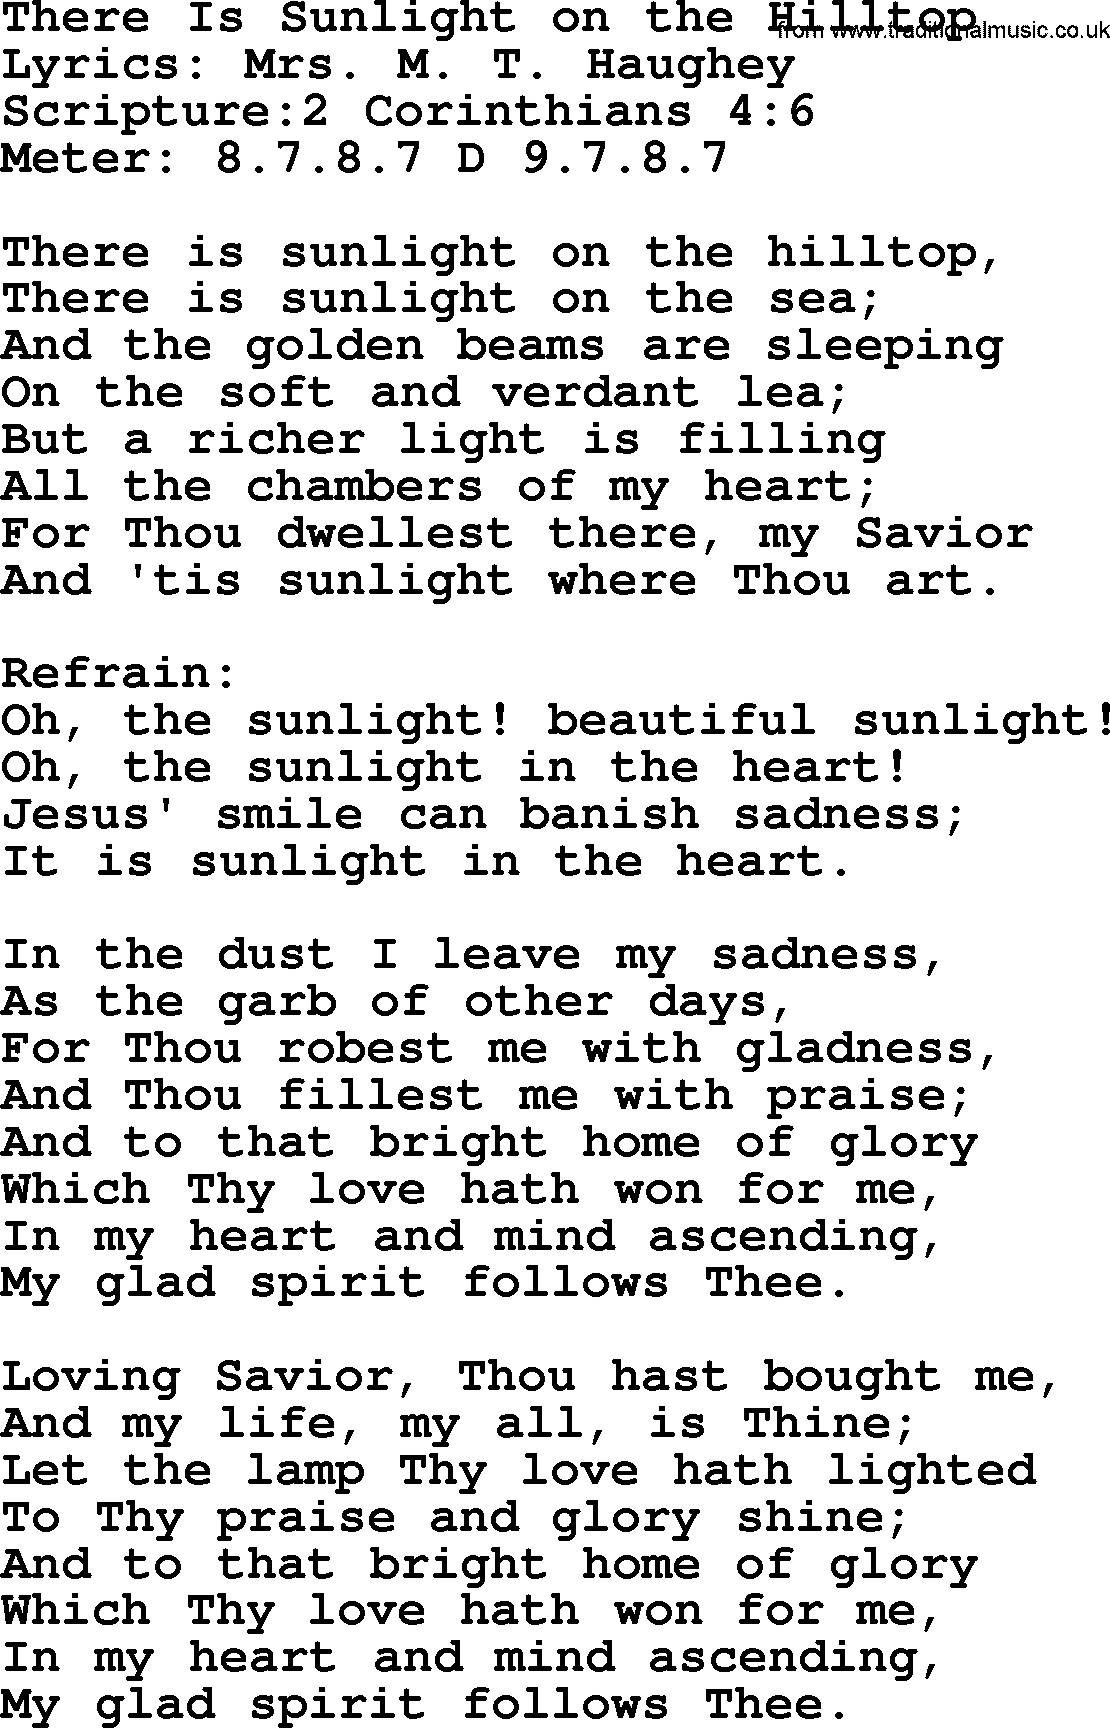 Hymns about  Angels, Hymn: There Is Sunlight on the Hilltop, lyrics, sheet music, midi & Mp3 music with PDF